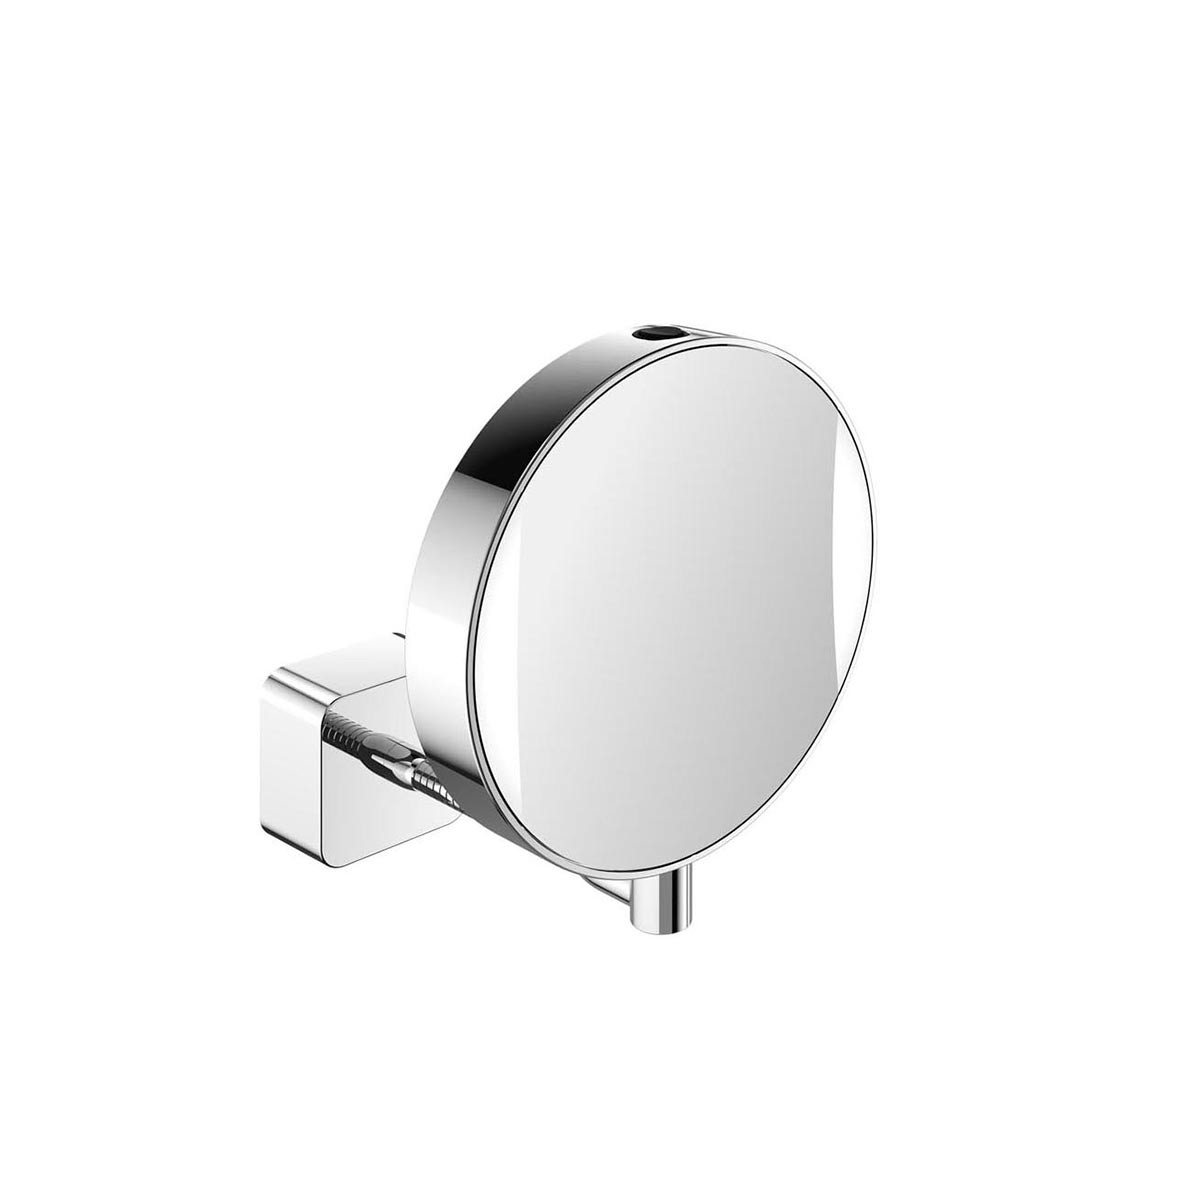 Spiegel 1095.001.11 led lighted magnifying mirror